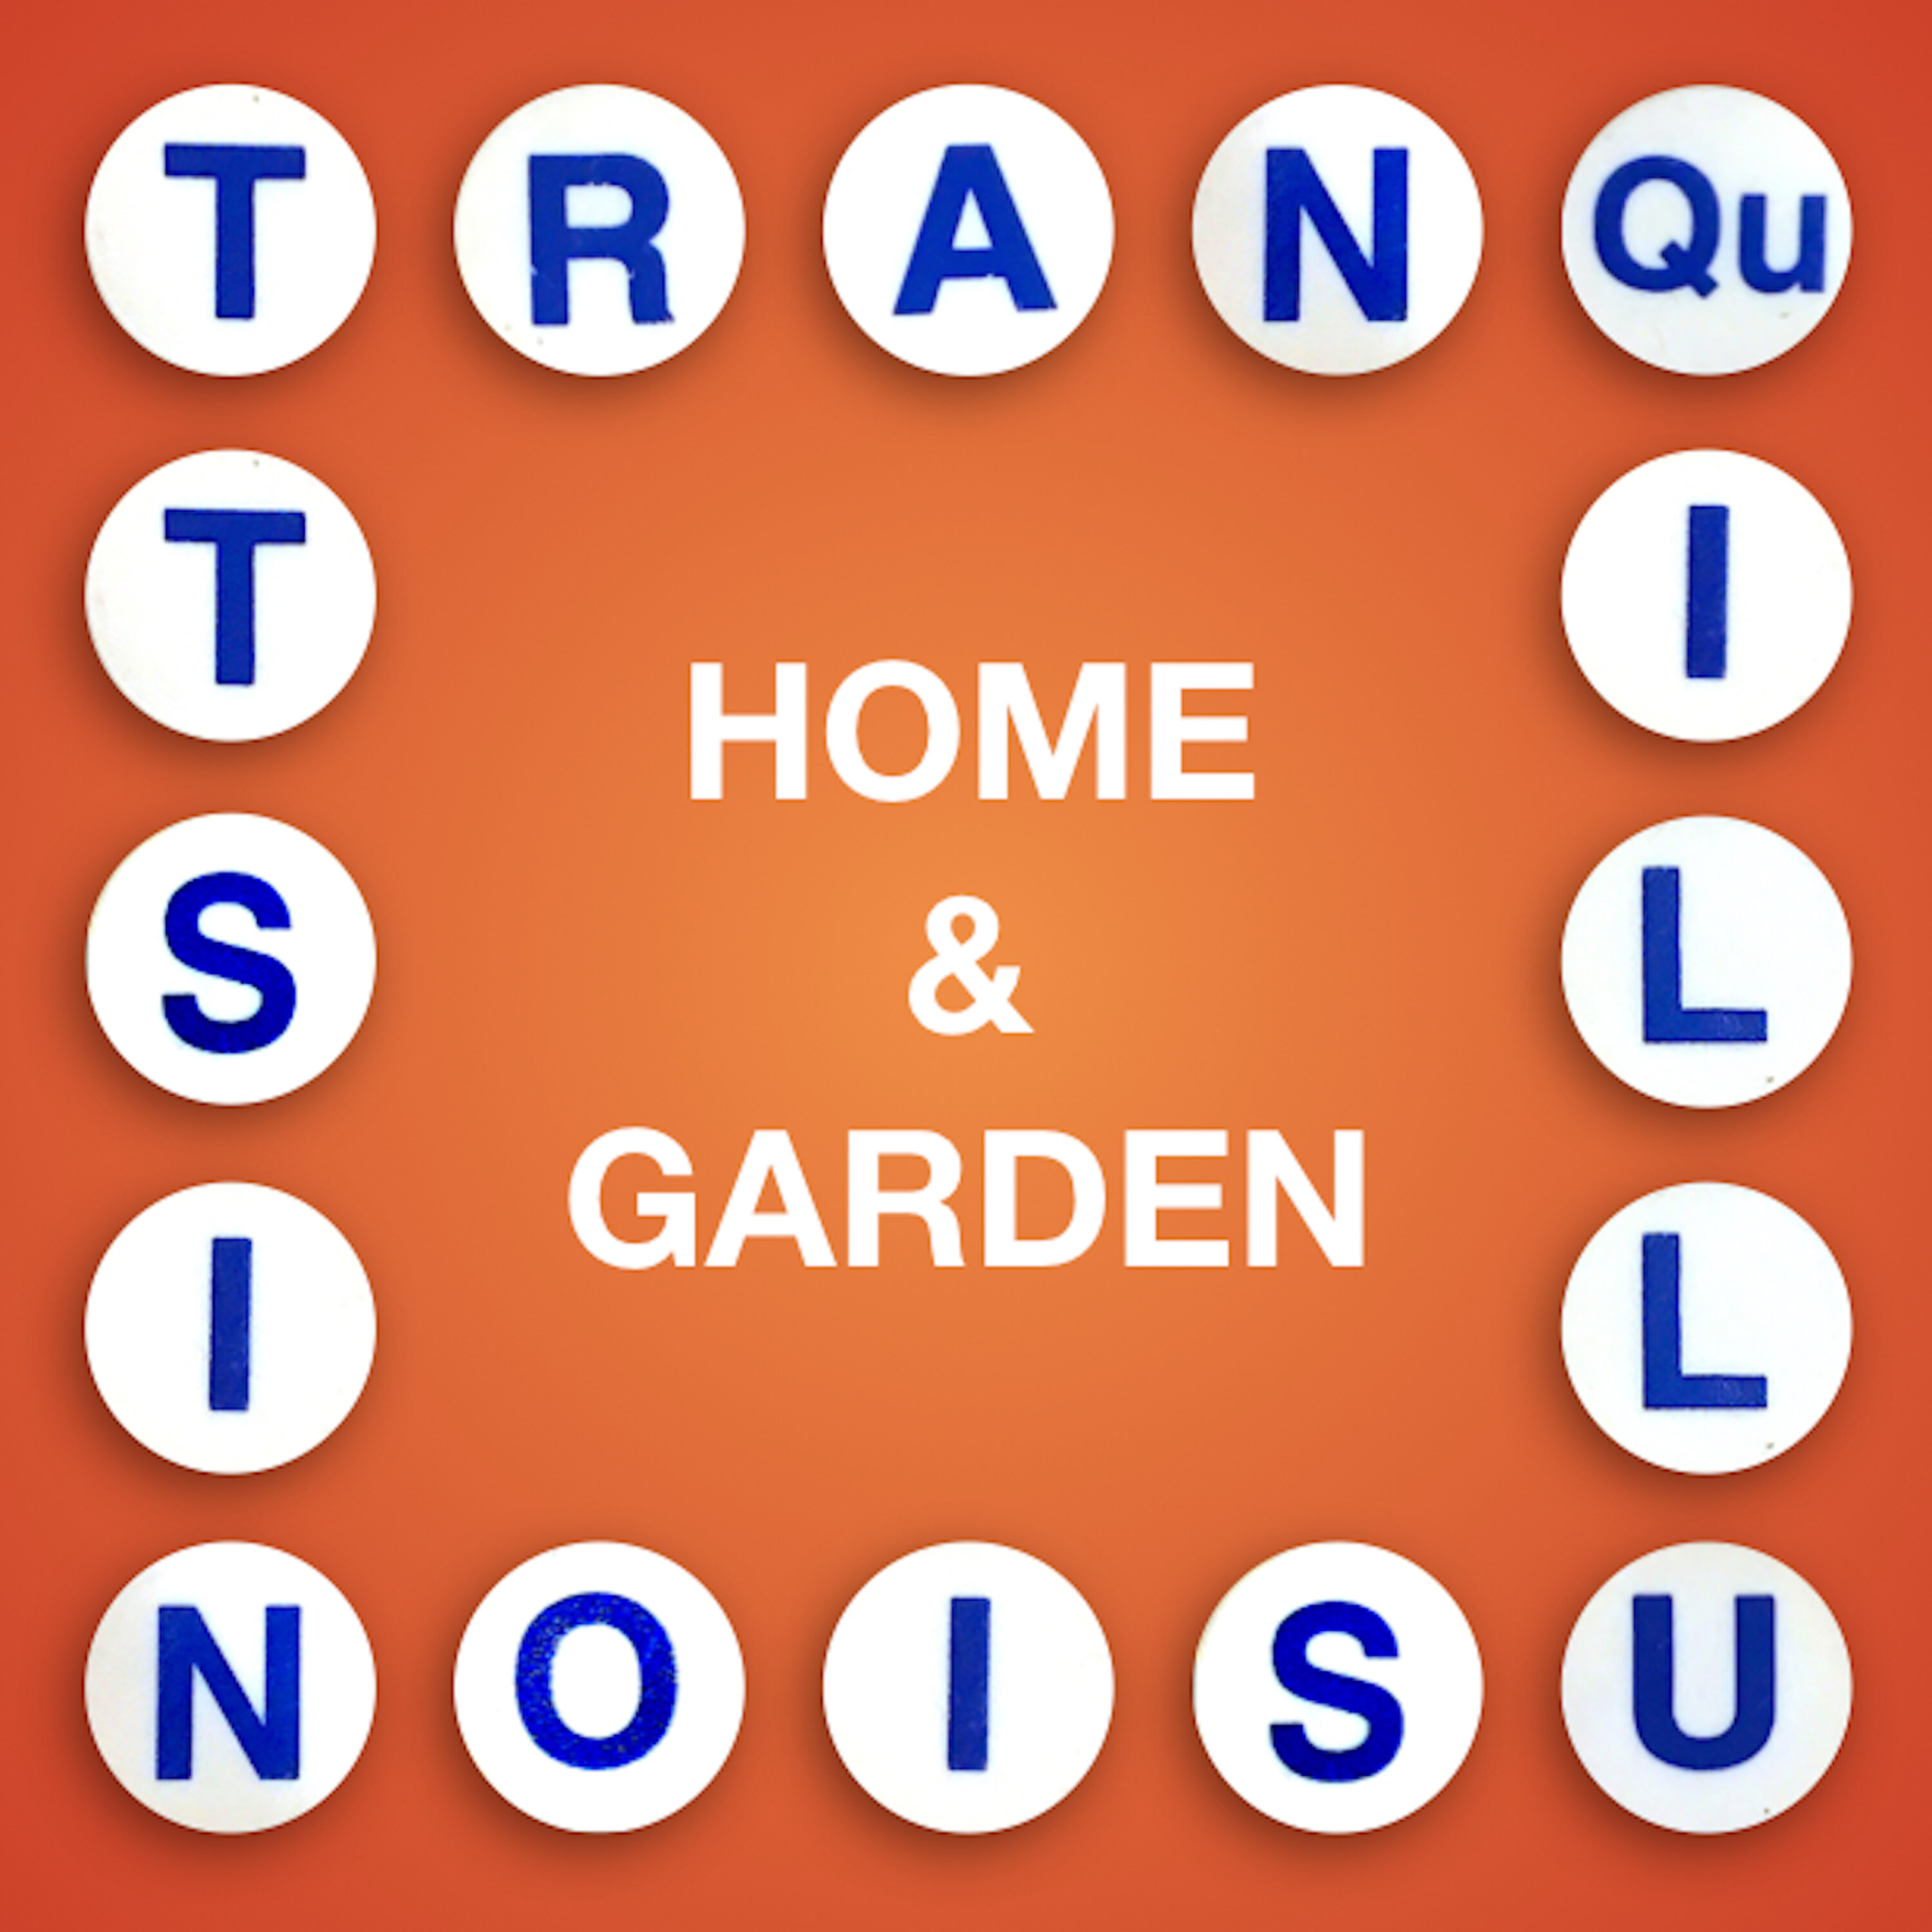 Thumbnail for "Tranquillusionist: Home and Garden".